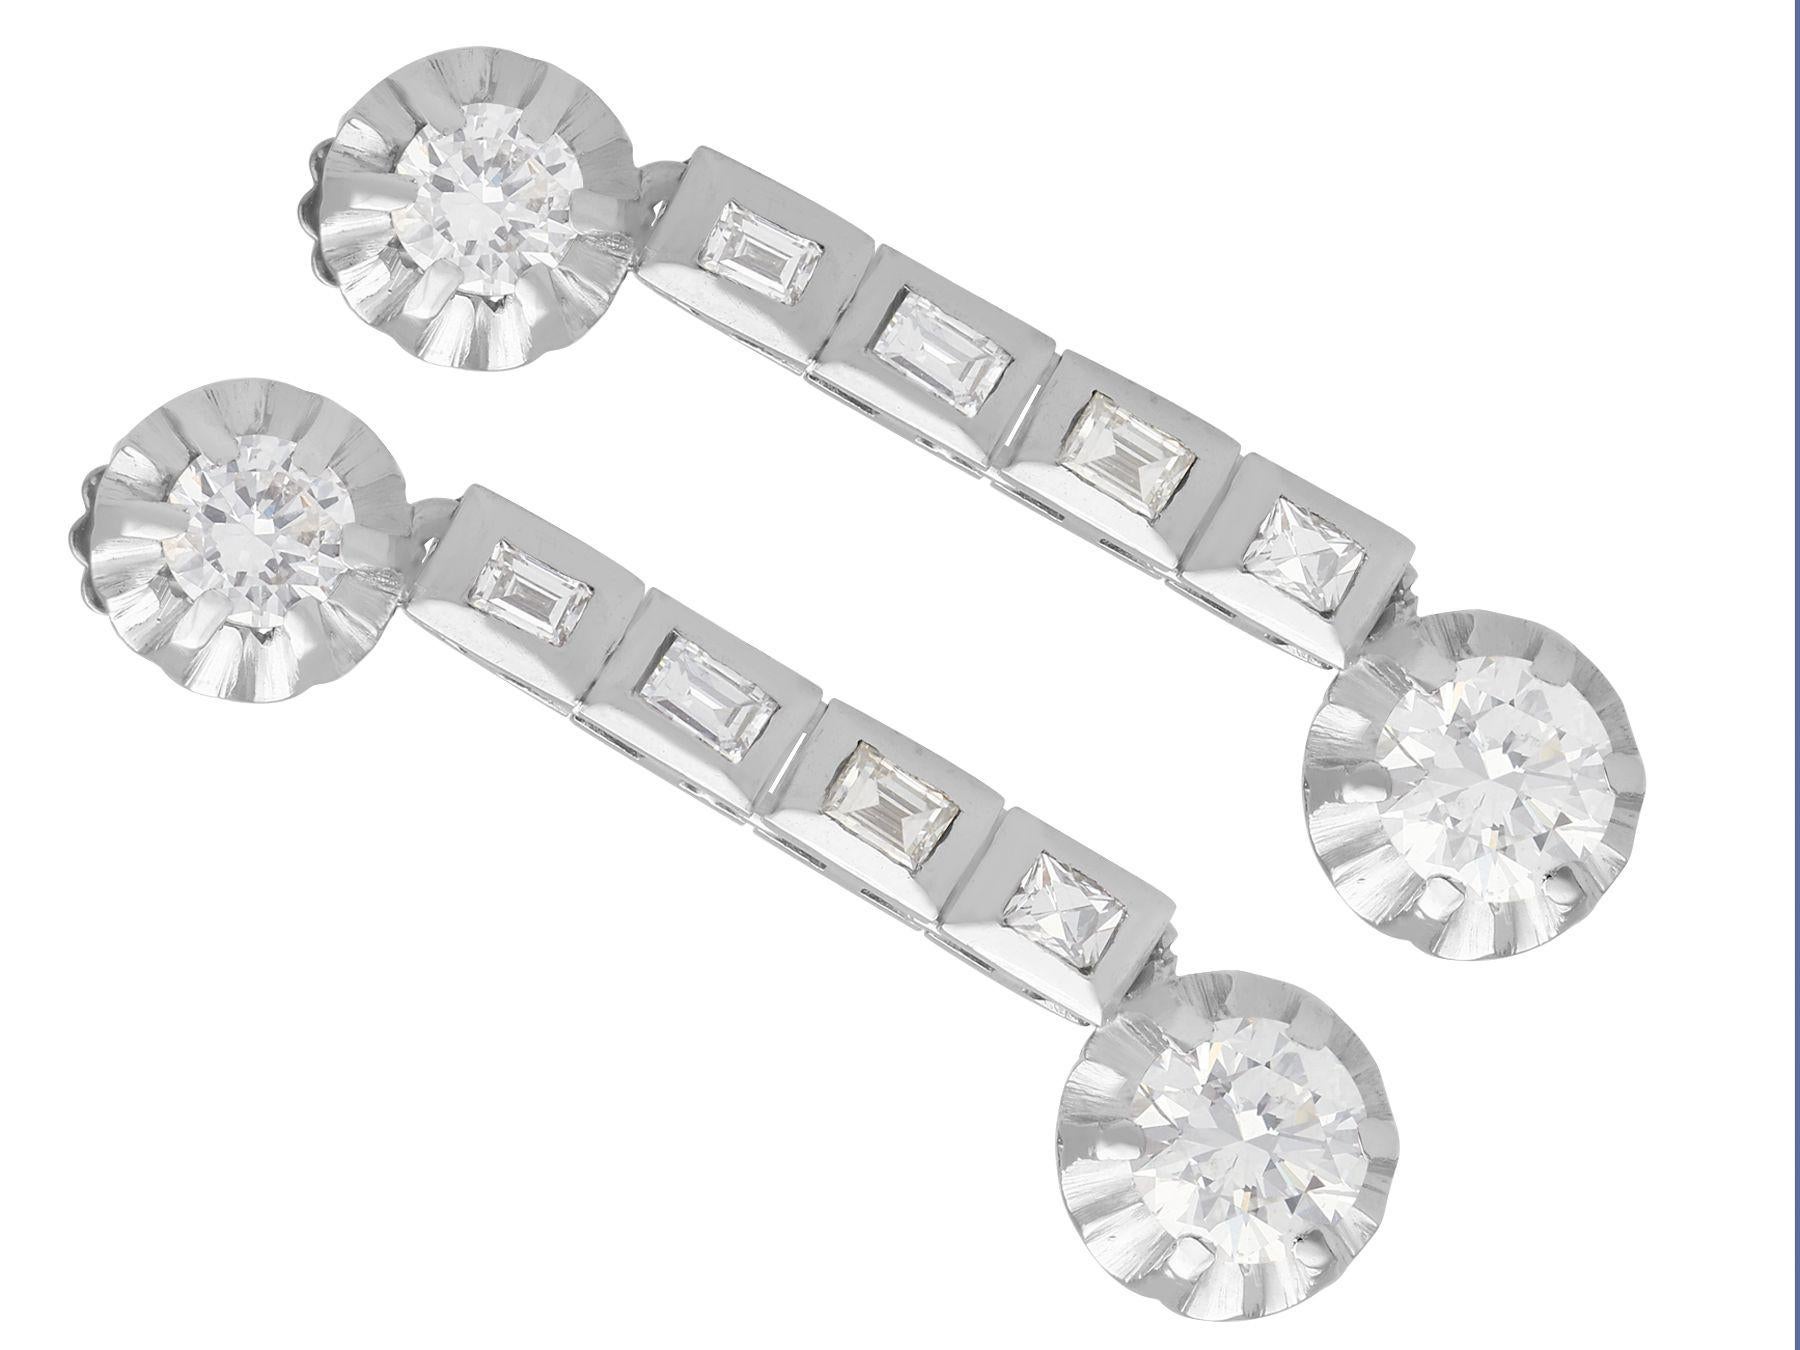 A stunning, fine and impressive pair of vintage 1950s 2.40 carat diamond and platinum drop earrings; part of our diverse diamond jewelry and estate jewelry collections.

These stunning, fine and impressive vintage drop earrings have been crafted in